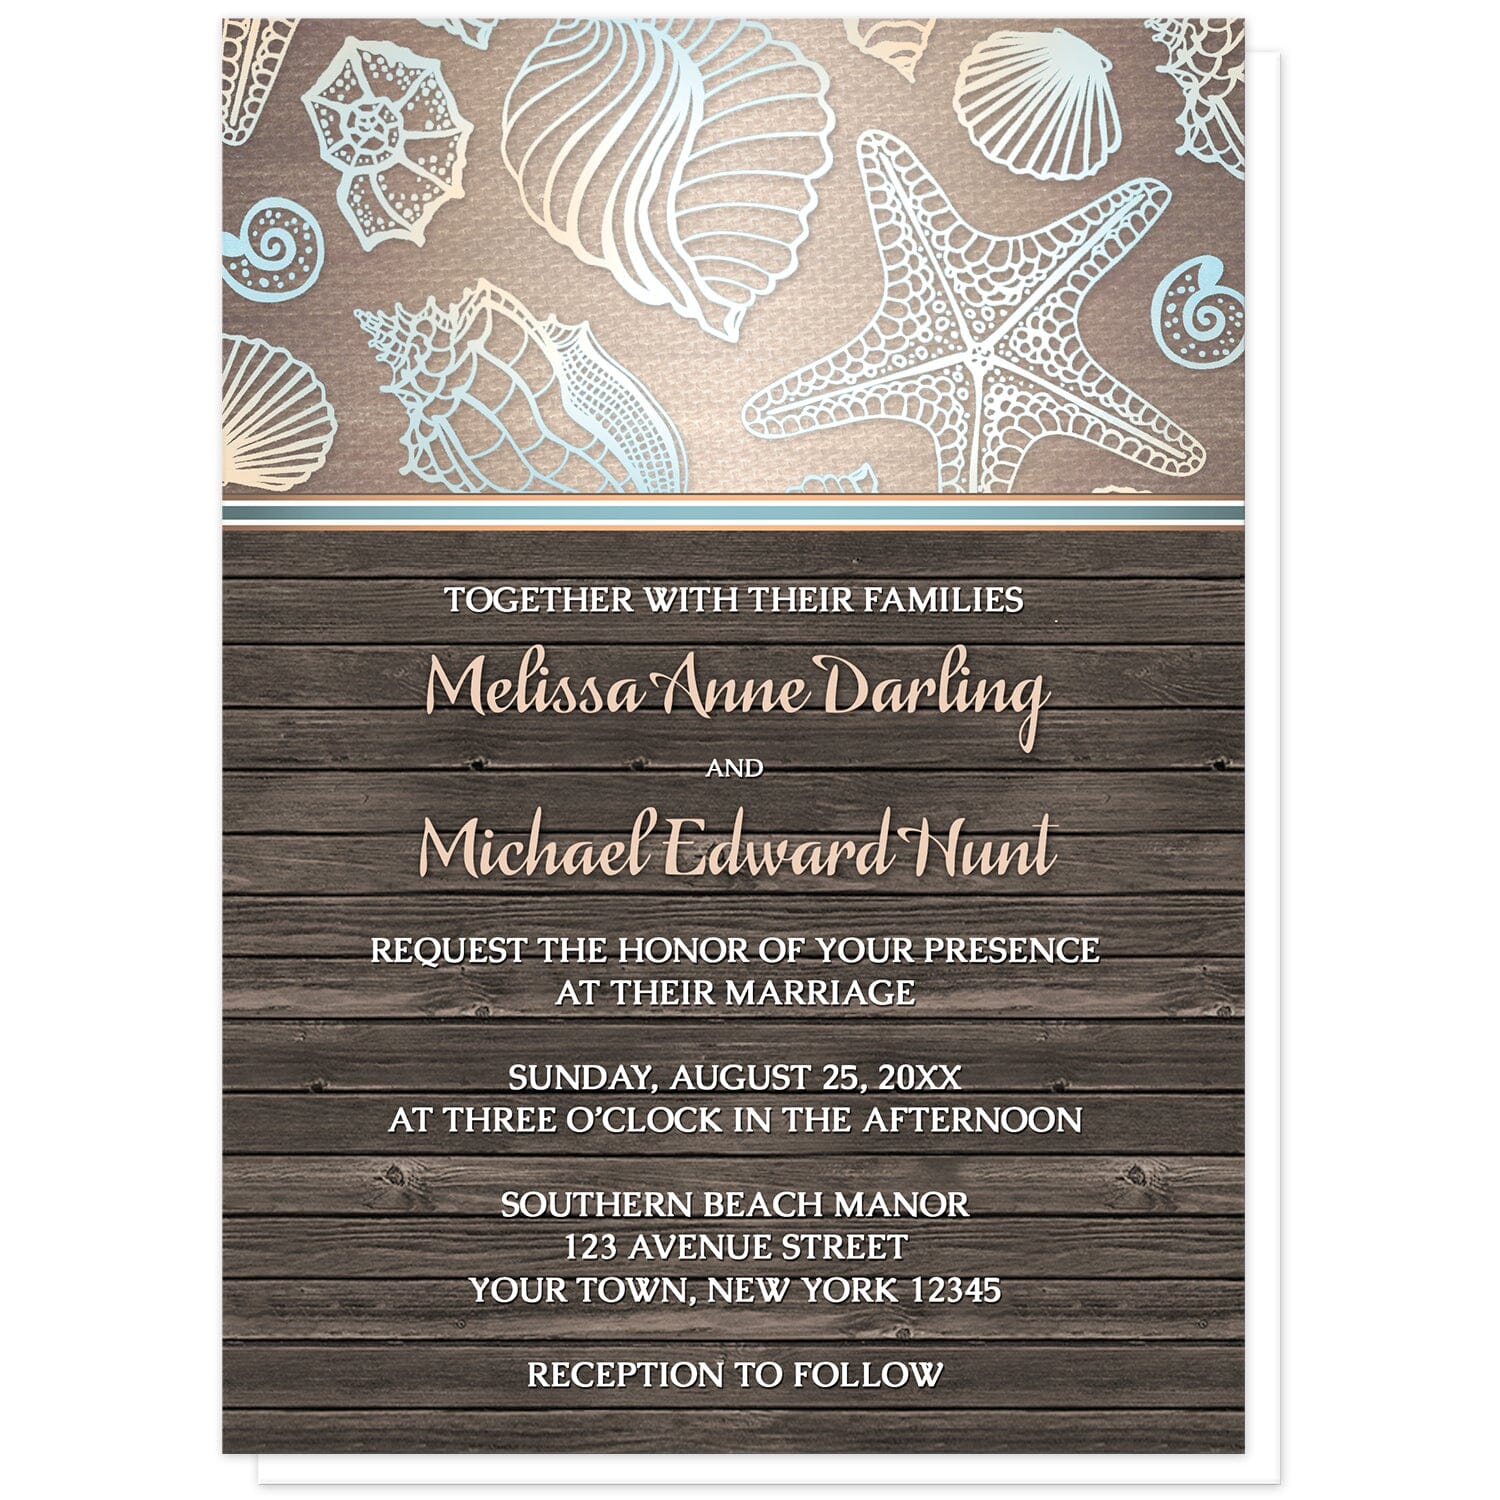 Rustic Wood Beach Seashell Wedding Invitations at Artistically Invited. Rustic wood beach seashell wedding invitations with a blue, orange, and white seashell outline pattern over a gradient sandy canvas texture illustration at the top. Your personalized marriage celebration details are custom printed in white and light orange over a brown wood background below the seashells.